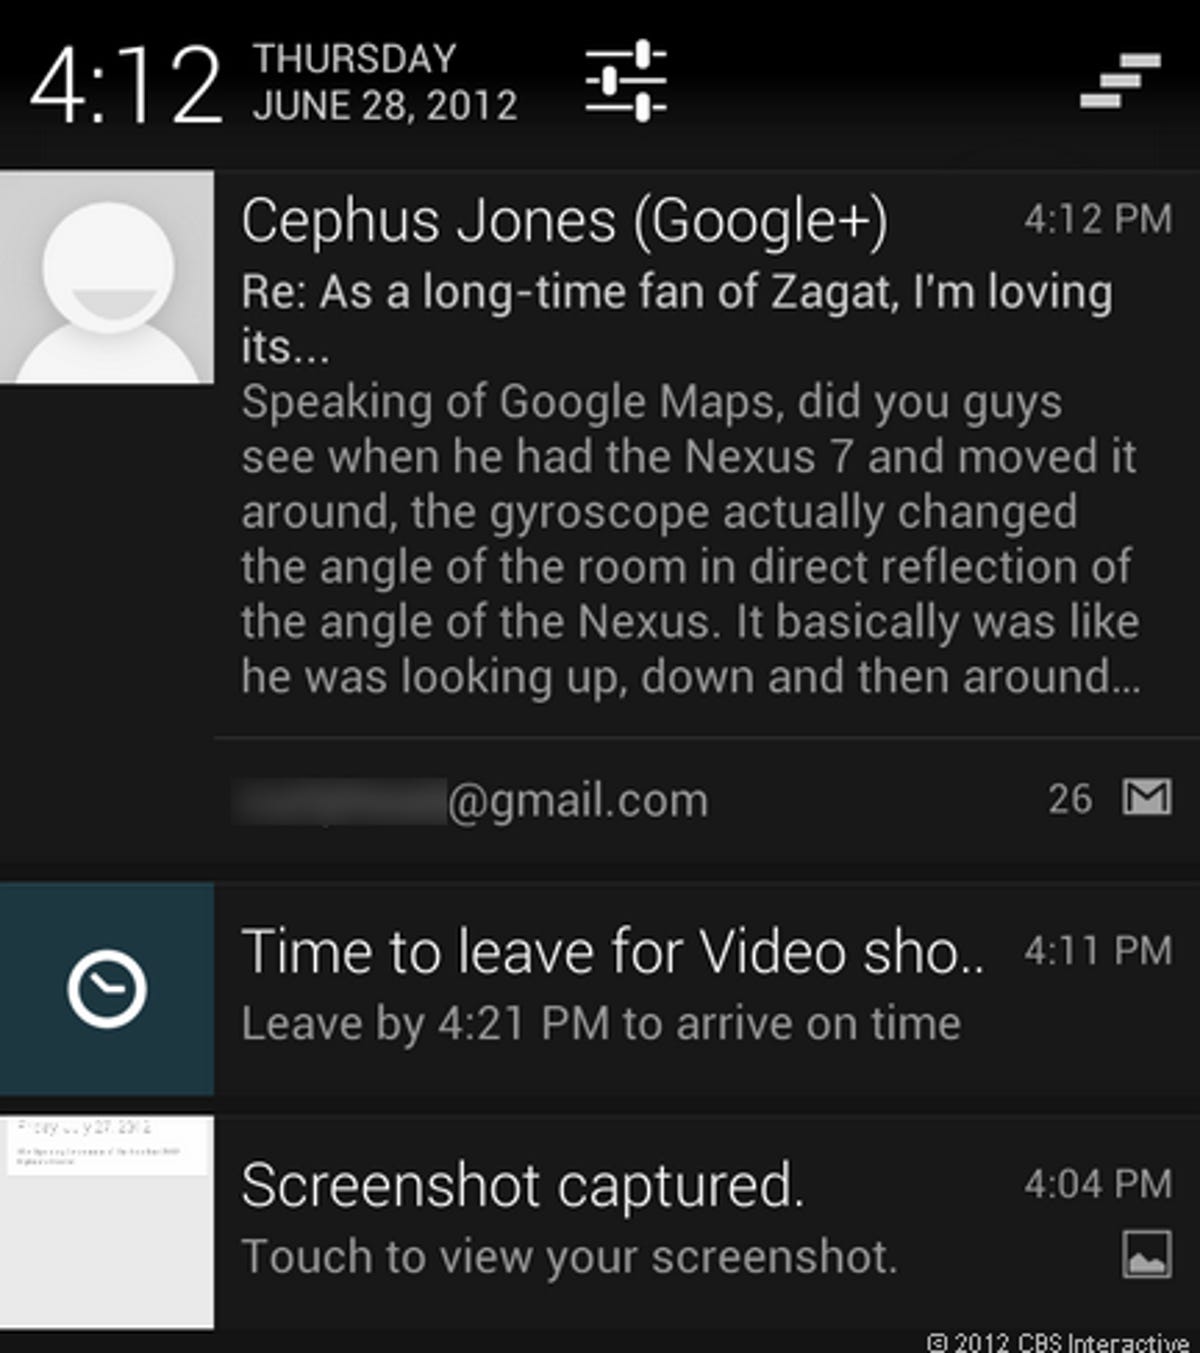 Android 4.1 notifications shade